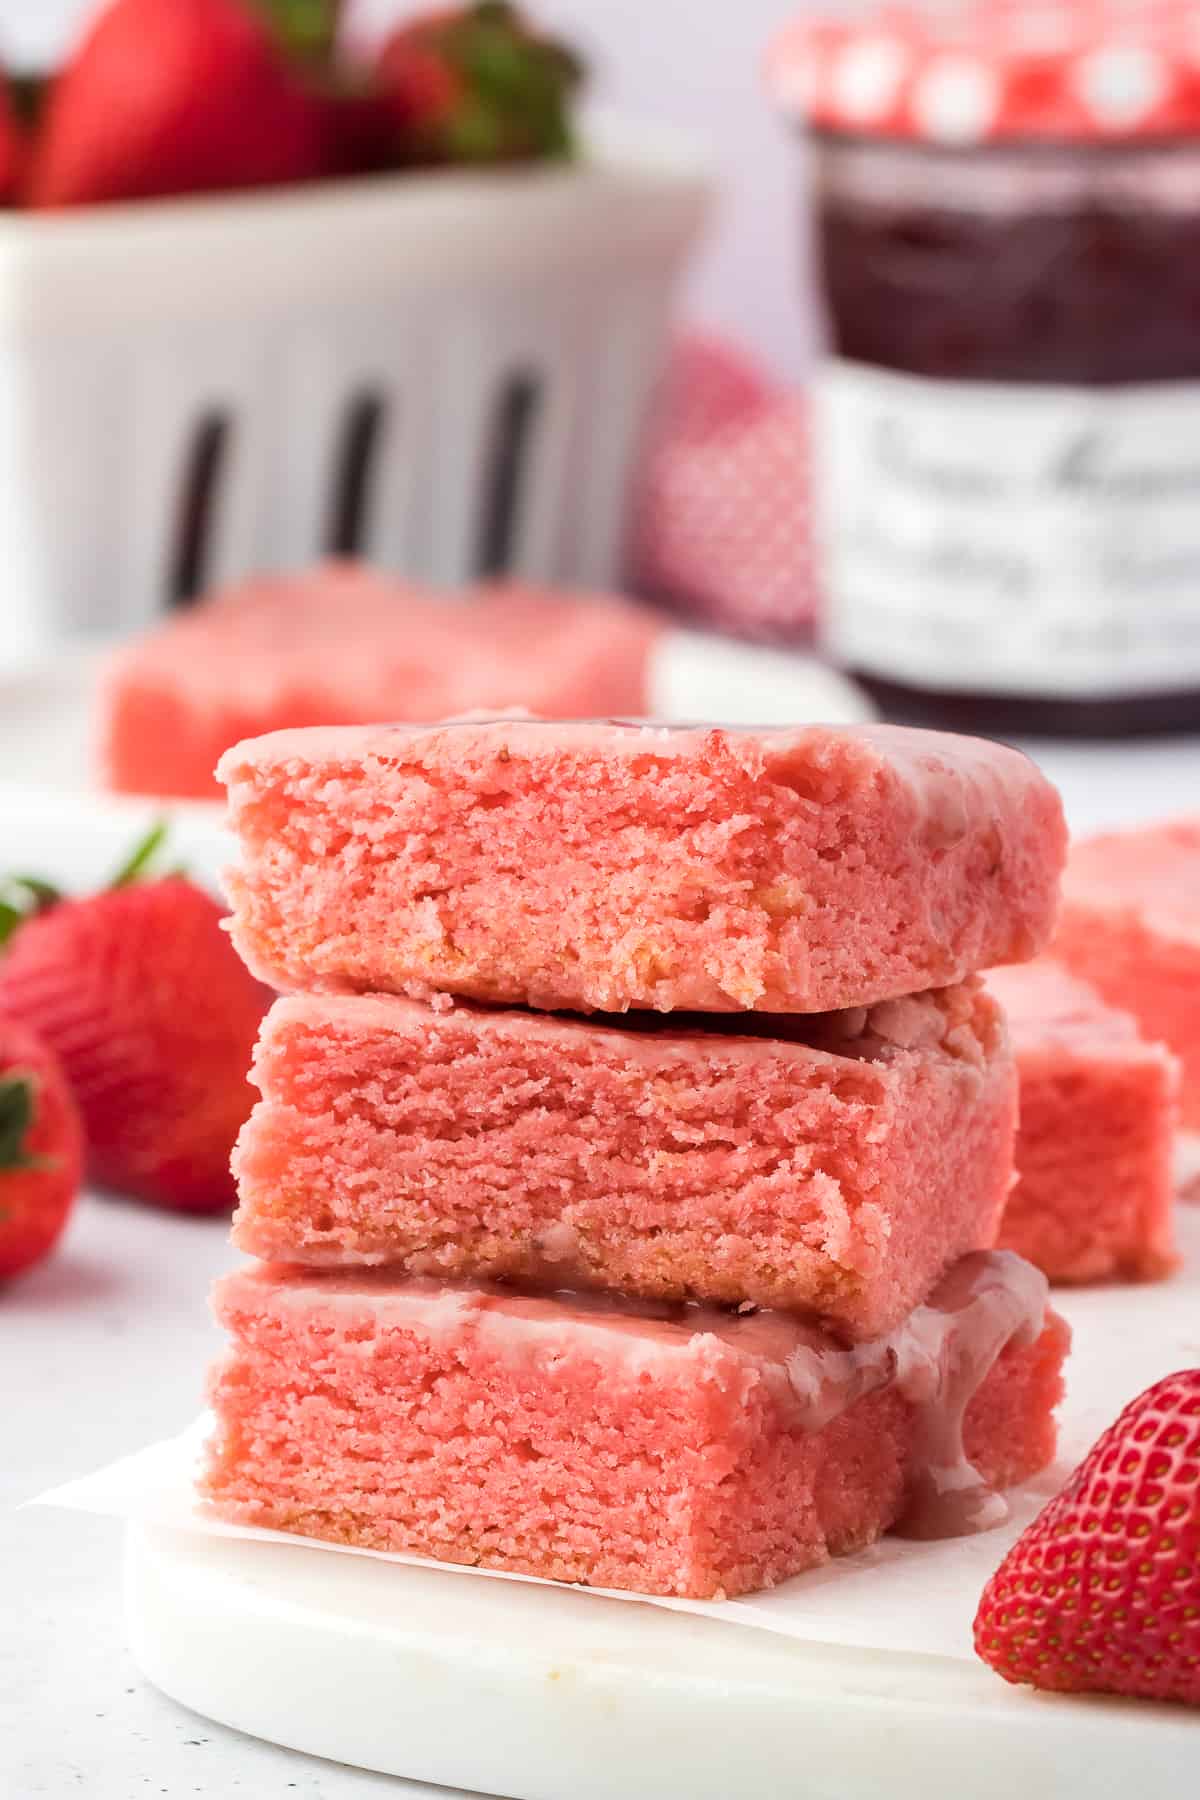 three strawberry brownies stacked surrounded by a red and white kitchen towel, fresh strawberries and strawberry preserves